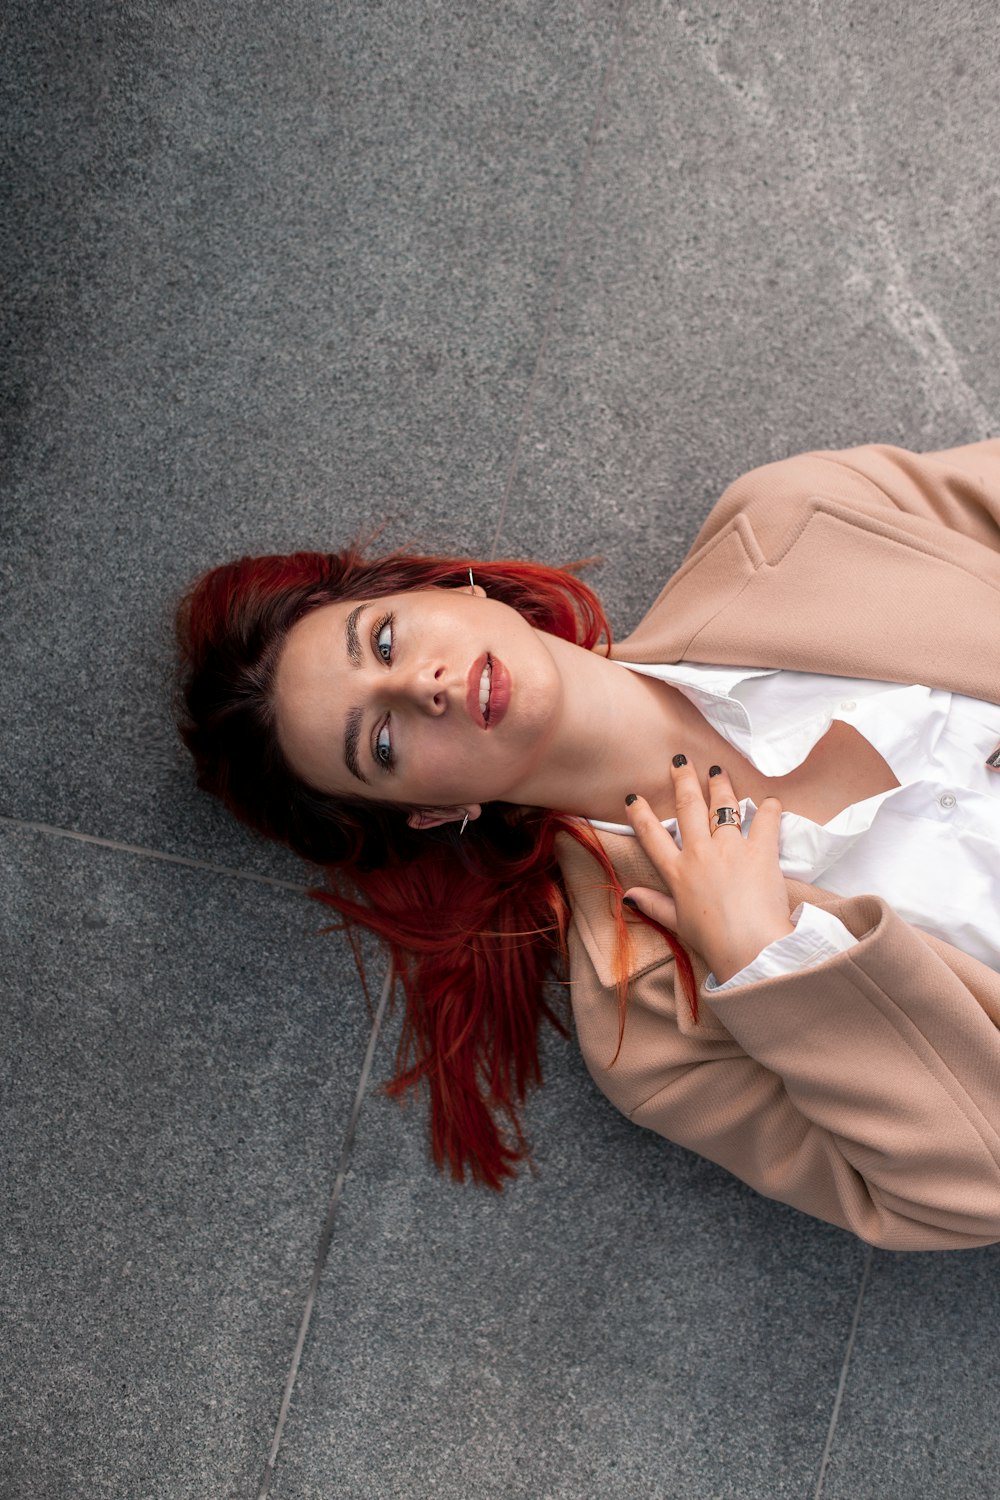 a woman with red hair is laying on the ground